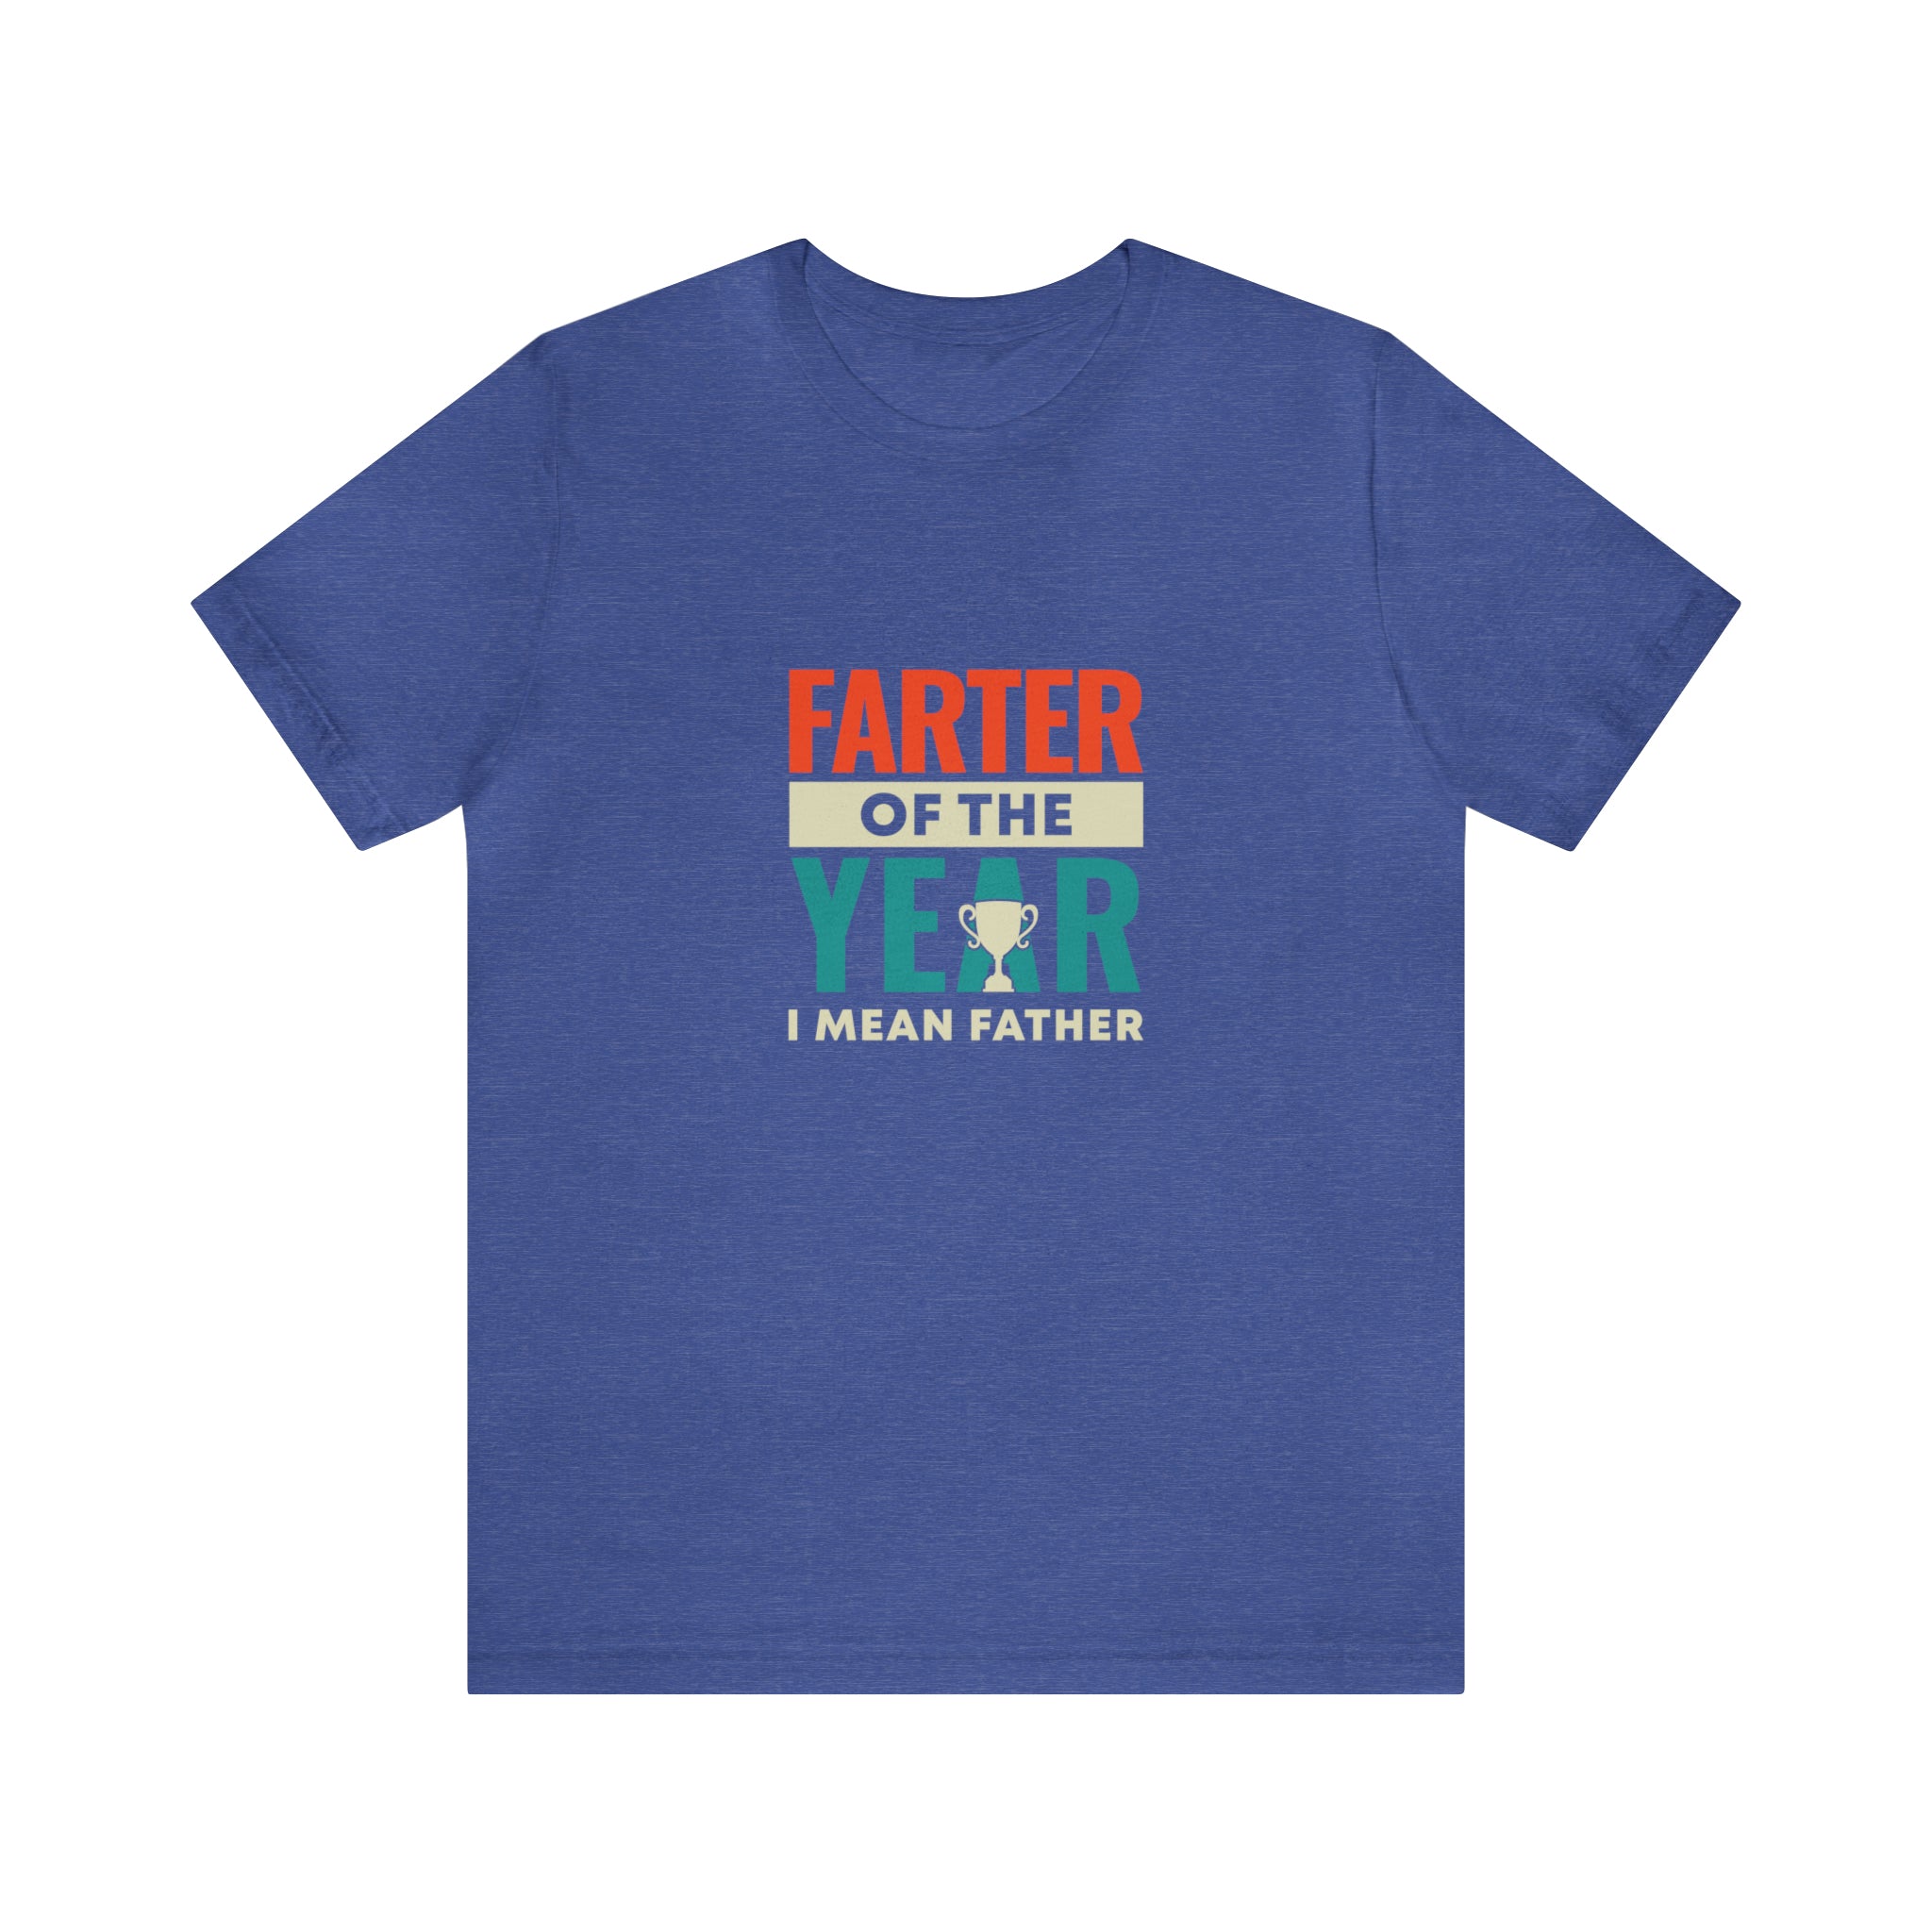 A Farter of the year T-Shirt that says father of the year by Printify.